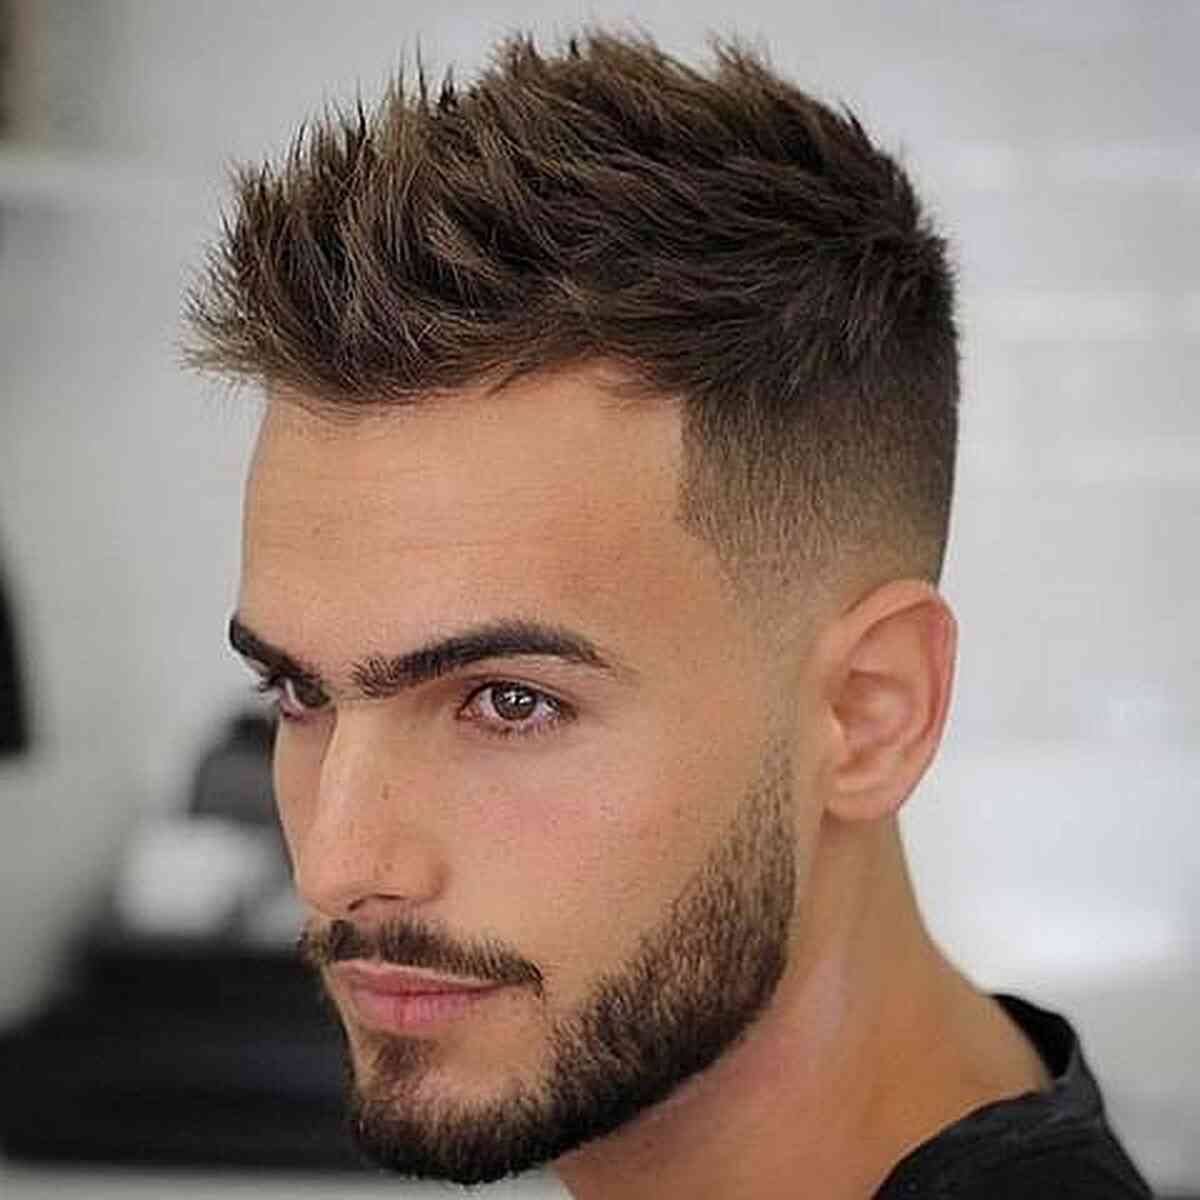 Winter Hair Colour Trends For Men 2022 | Inecto